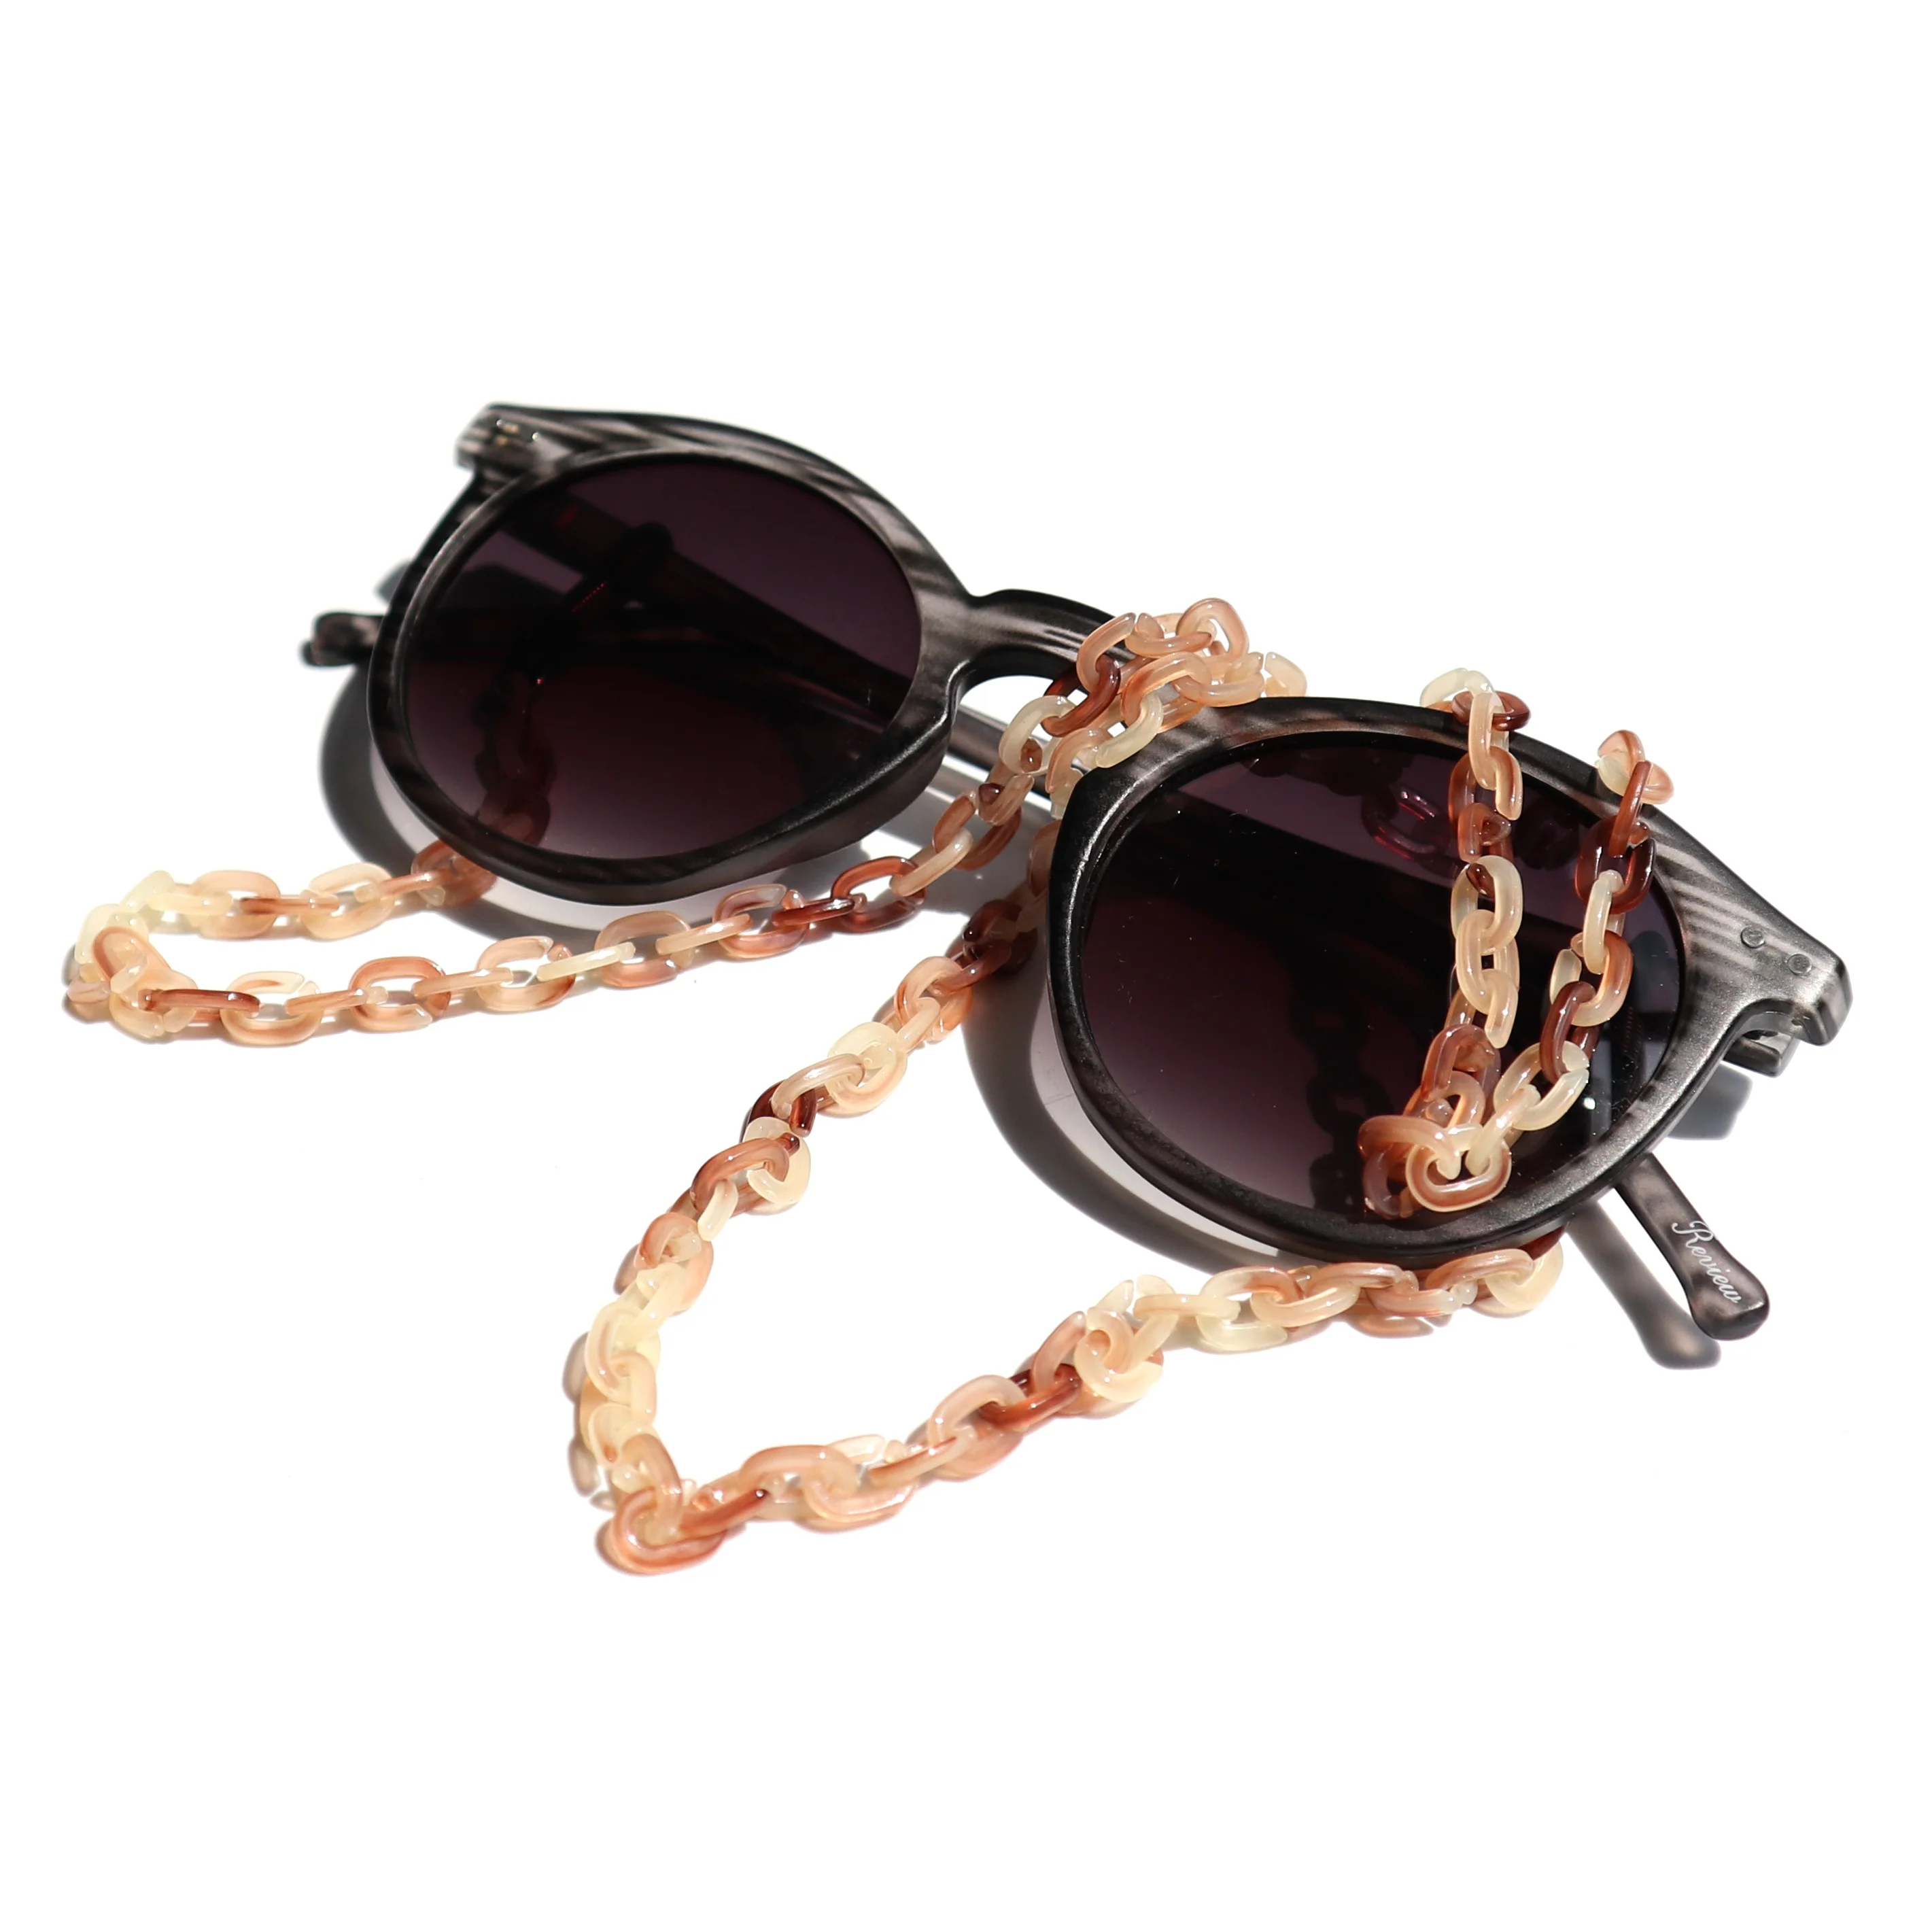 2020 New Arrival Acrylic Glasses Chain Fashion Chain Sunglasses In Stock  Glasses Chain Eyewear Accessory Sunglass Cord - Buy Acrylic Glasses  Chain,Chain Sunglasses,Glasses Chain Eyewear Accessory Product on  